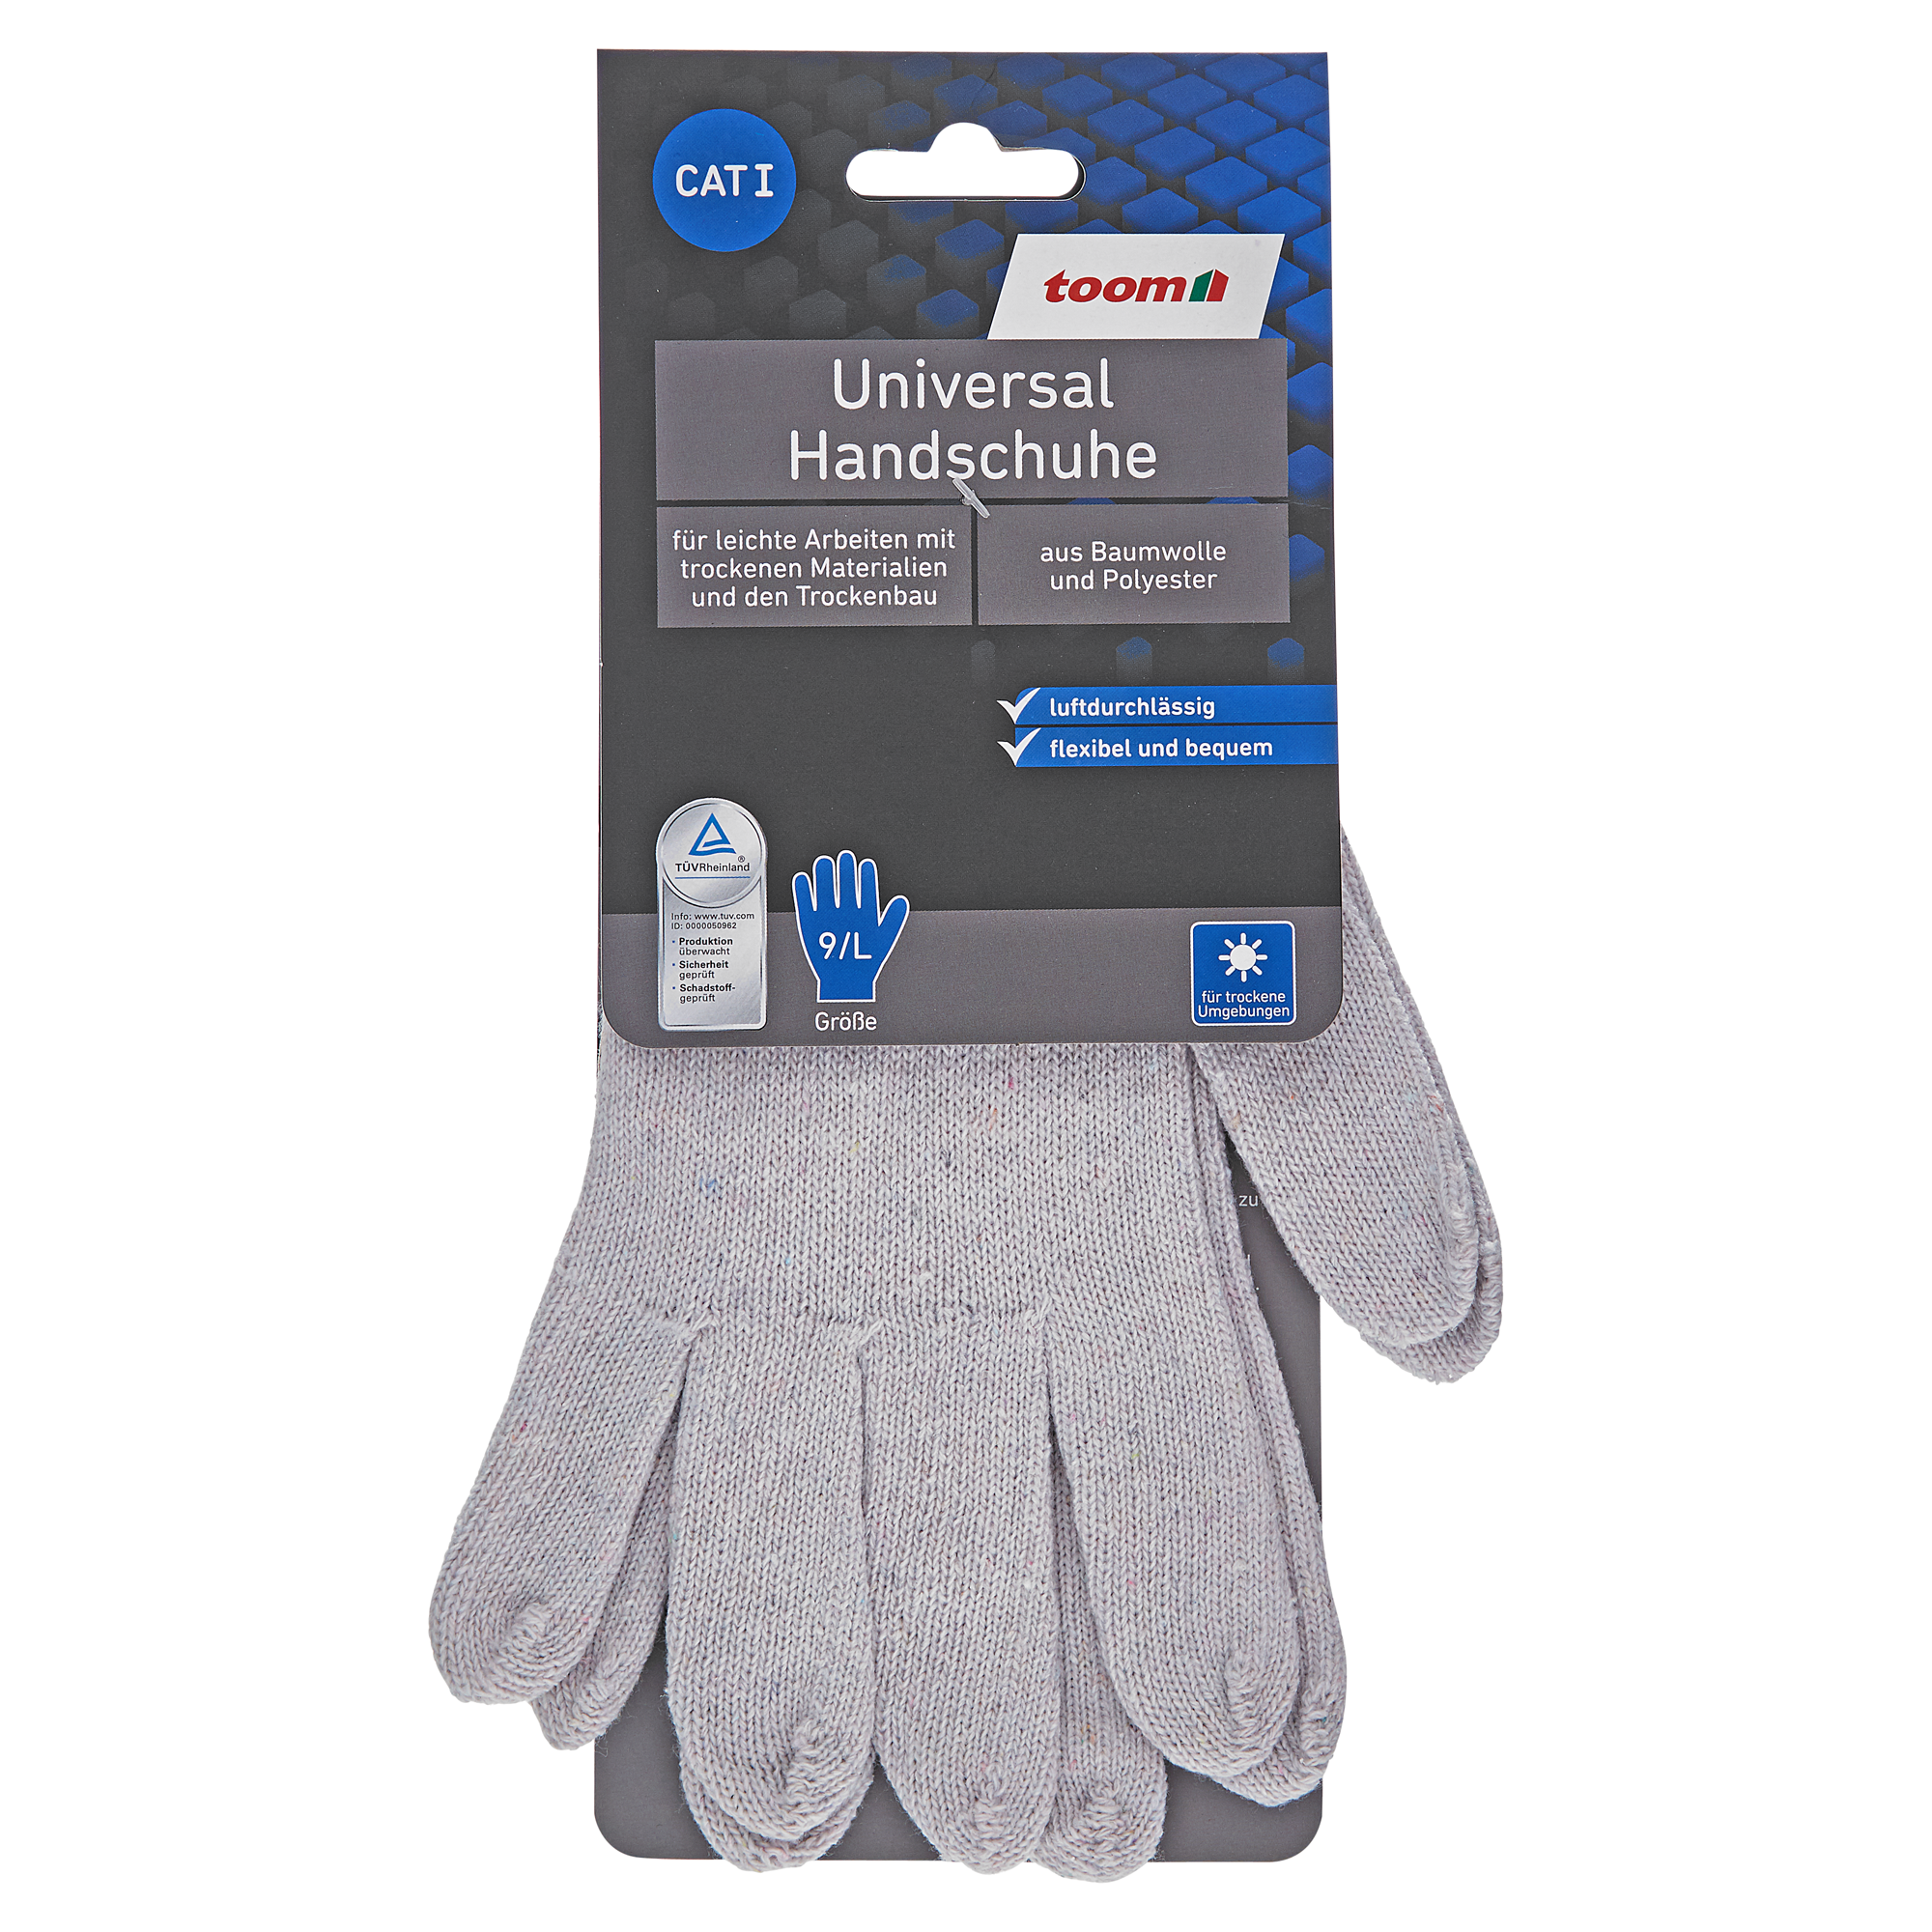 Universal Handschuhe weiß Gr. 9/L + product picture